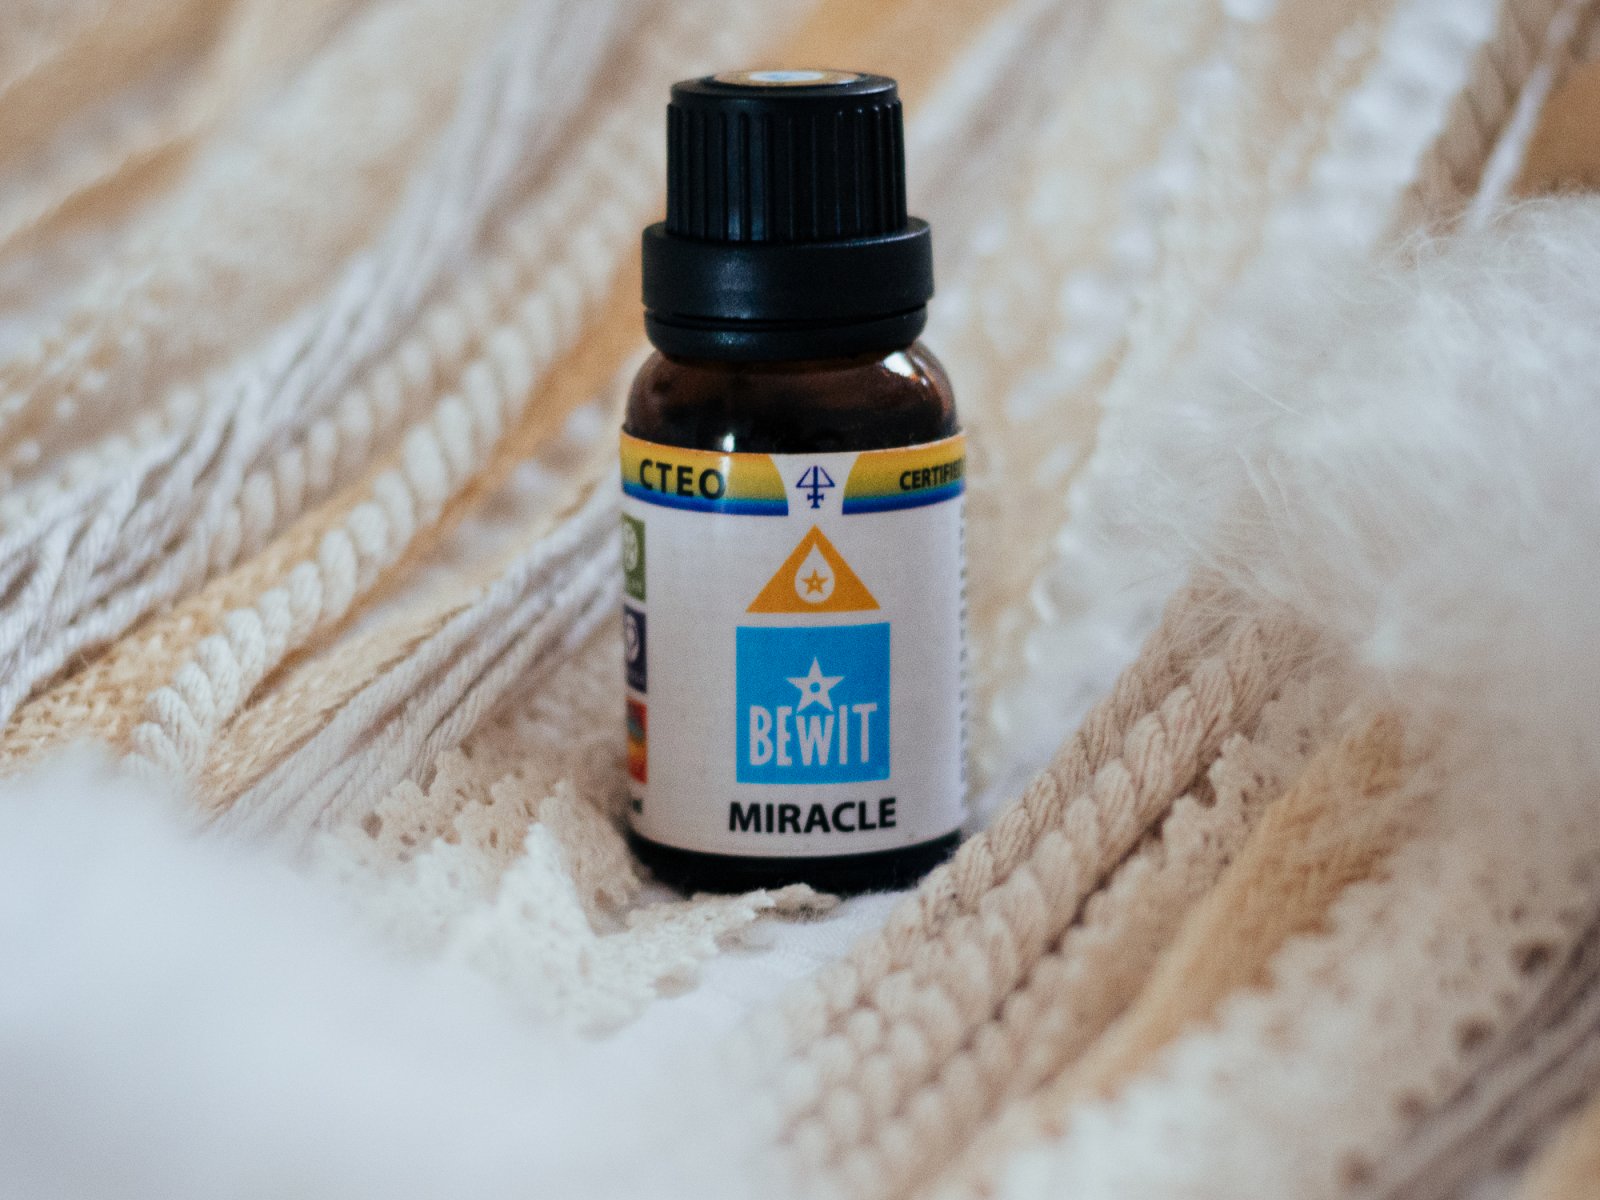 BEWIT MIRACLE - A unique blend of the essential oils - 3